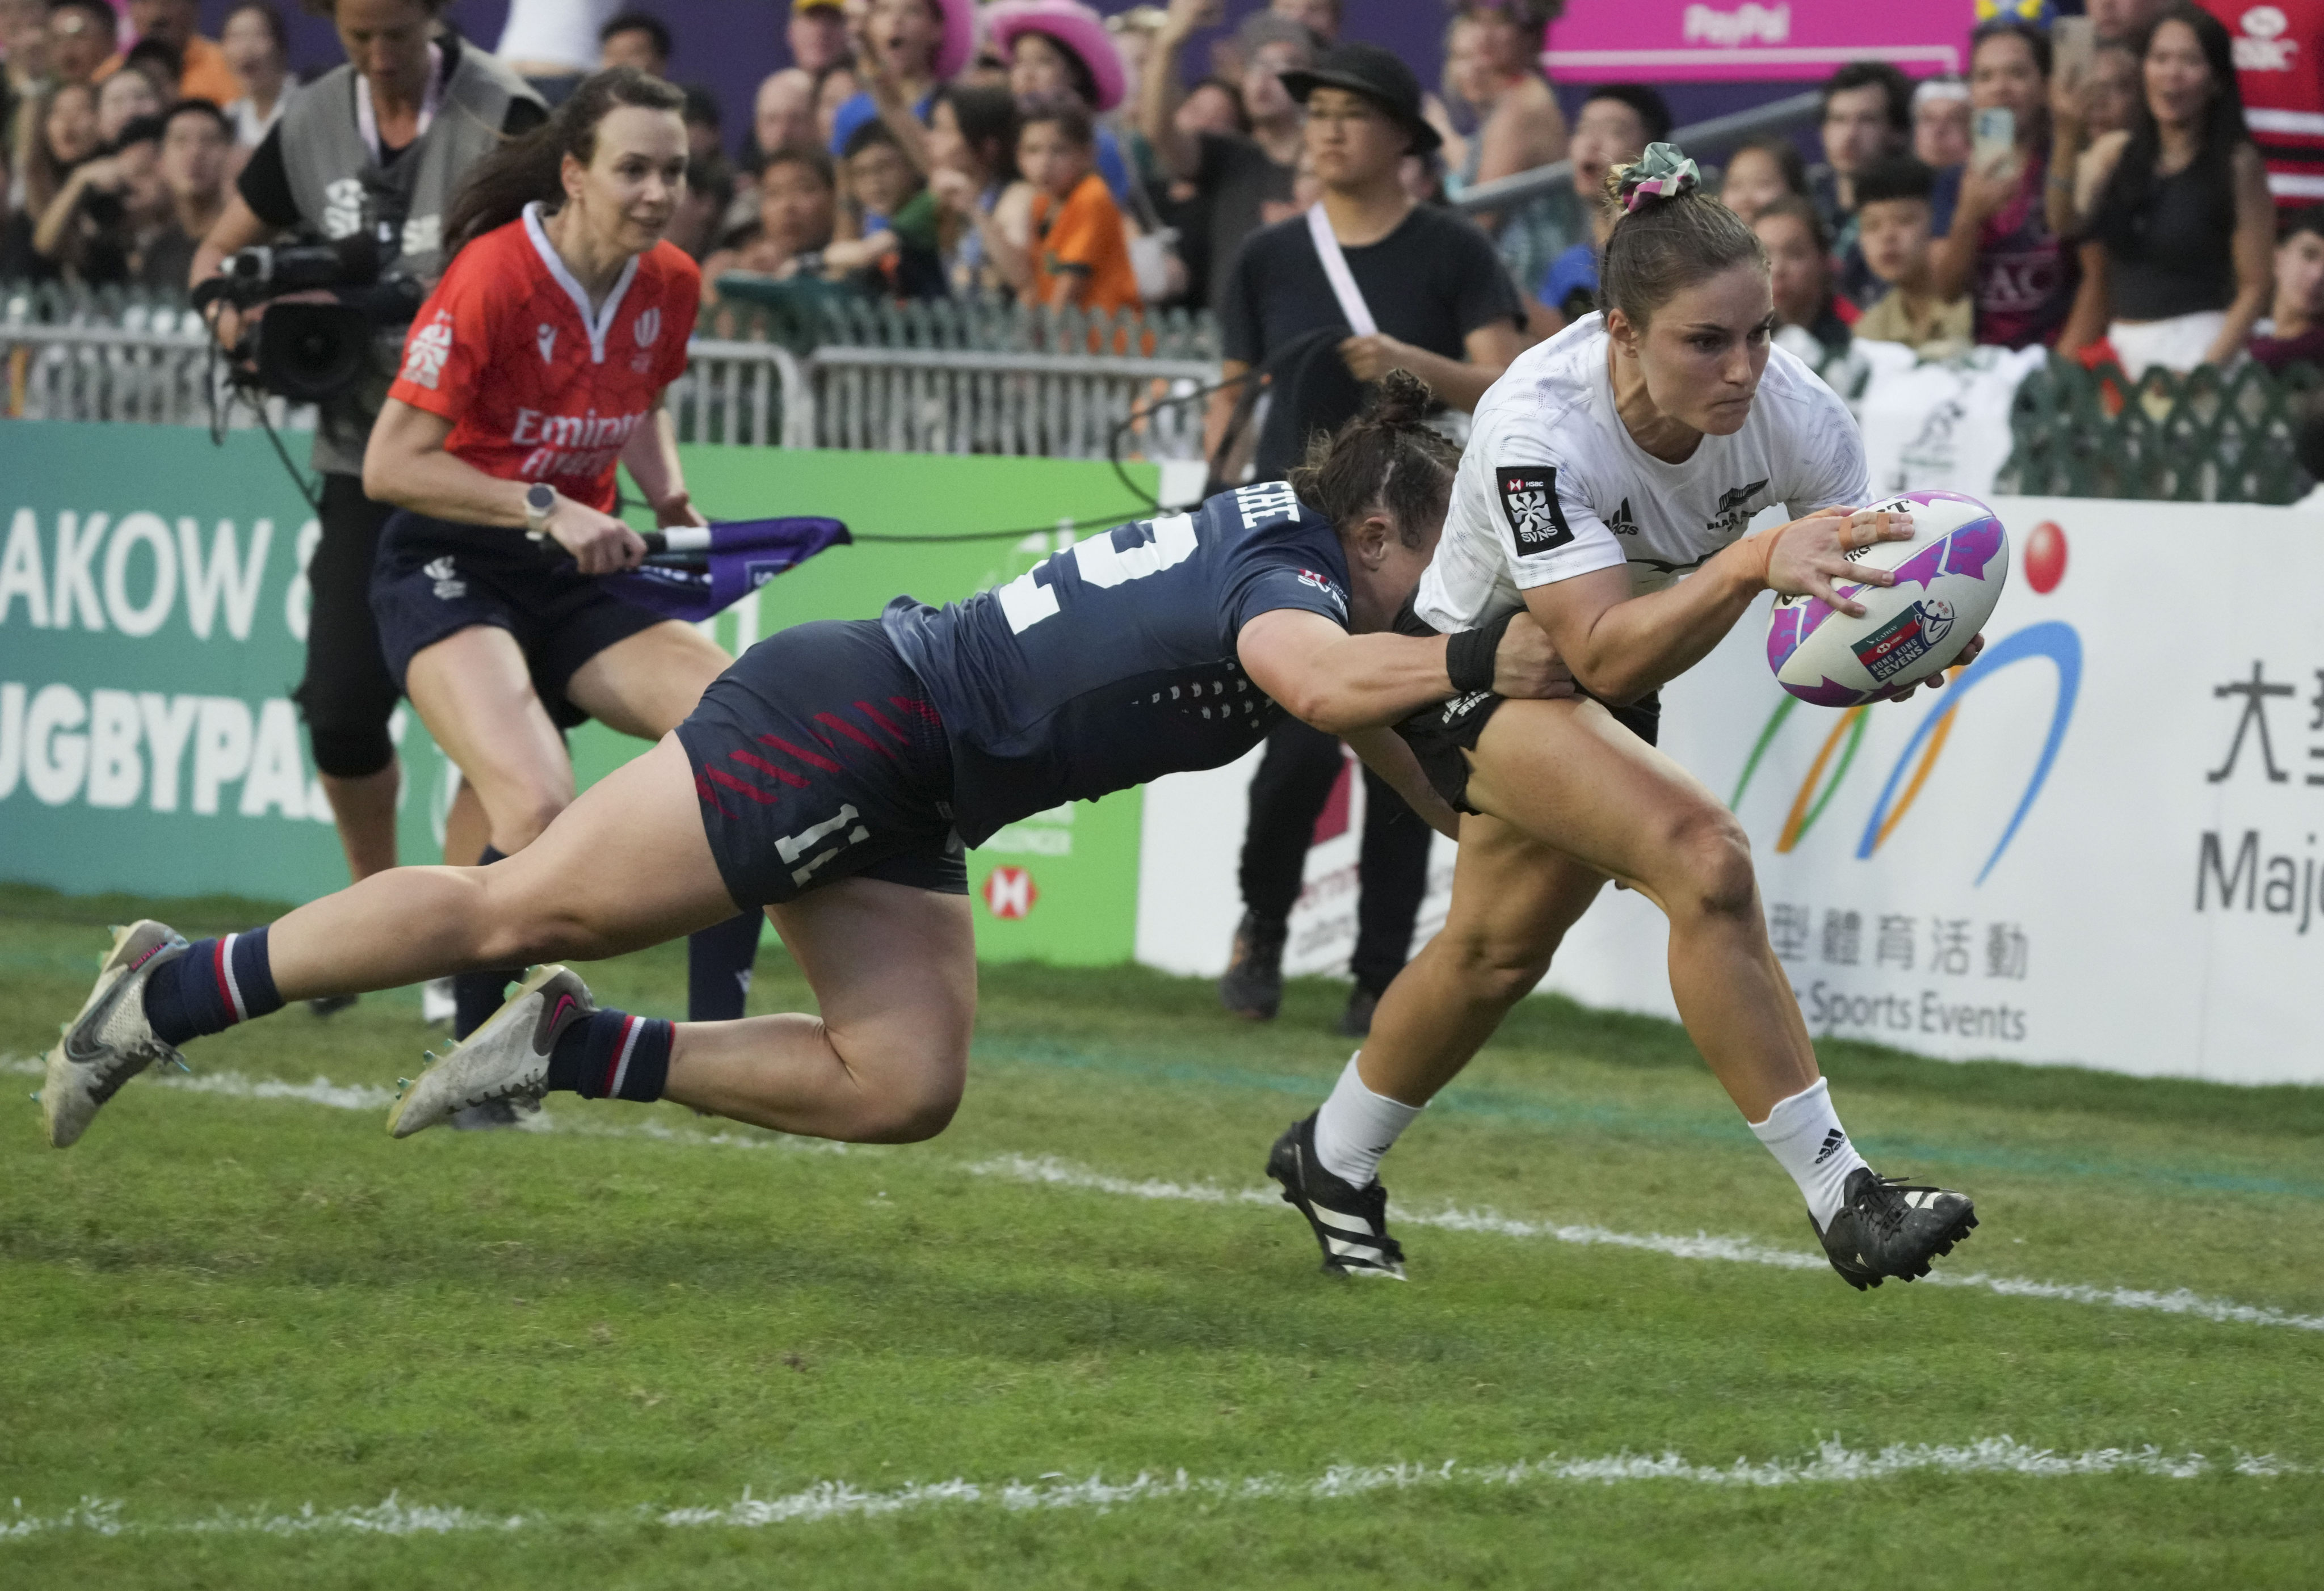 New Zealand’s Michaela Blyde reaches down to score a try against the USA in the women’s final at the Hong Kong Sevens. Photo: Sam Tsang